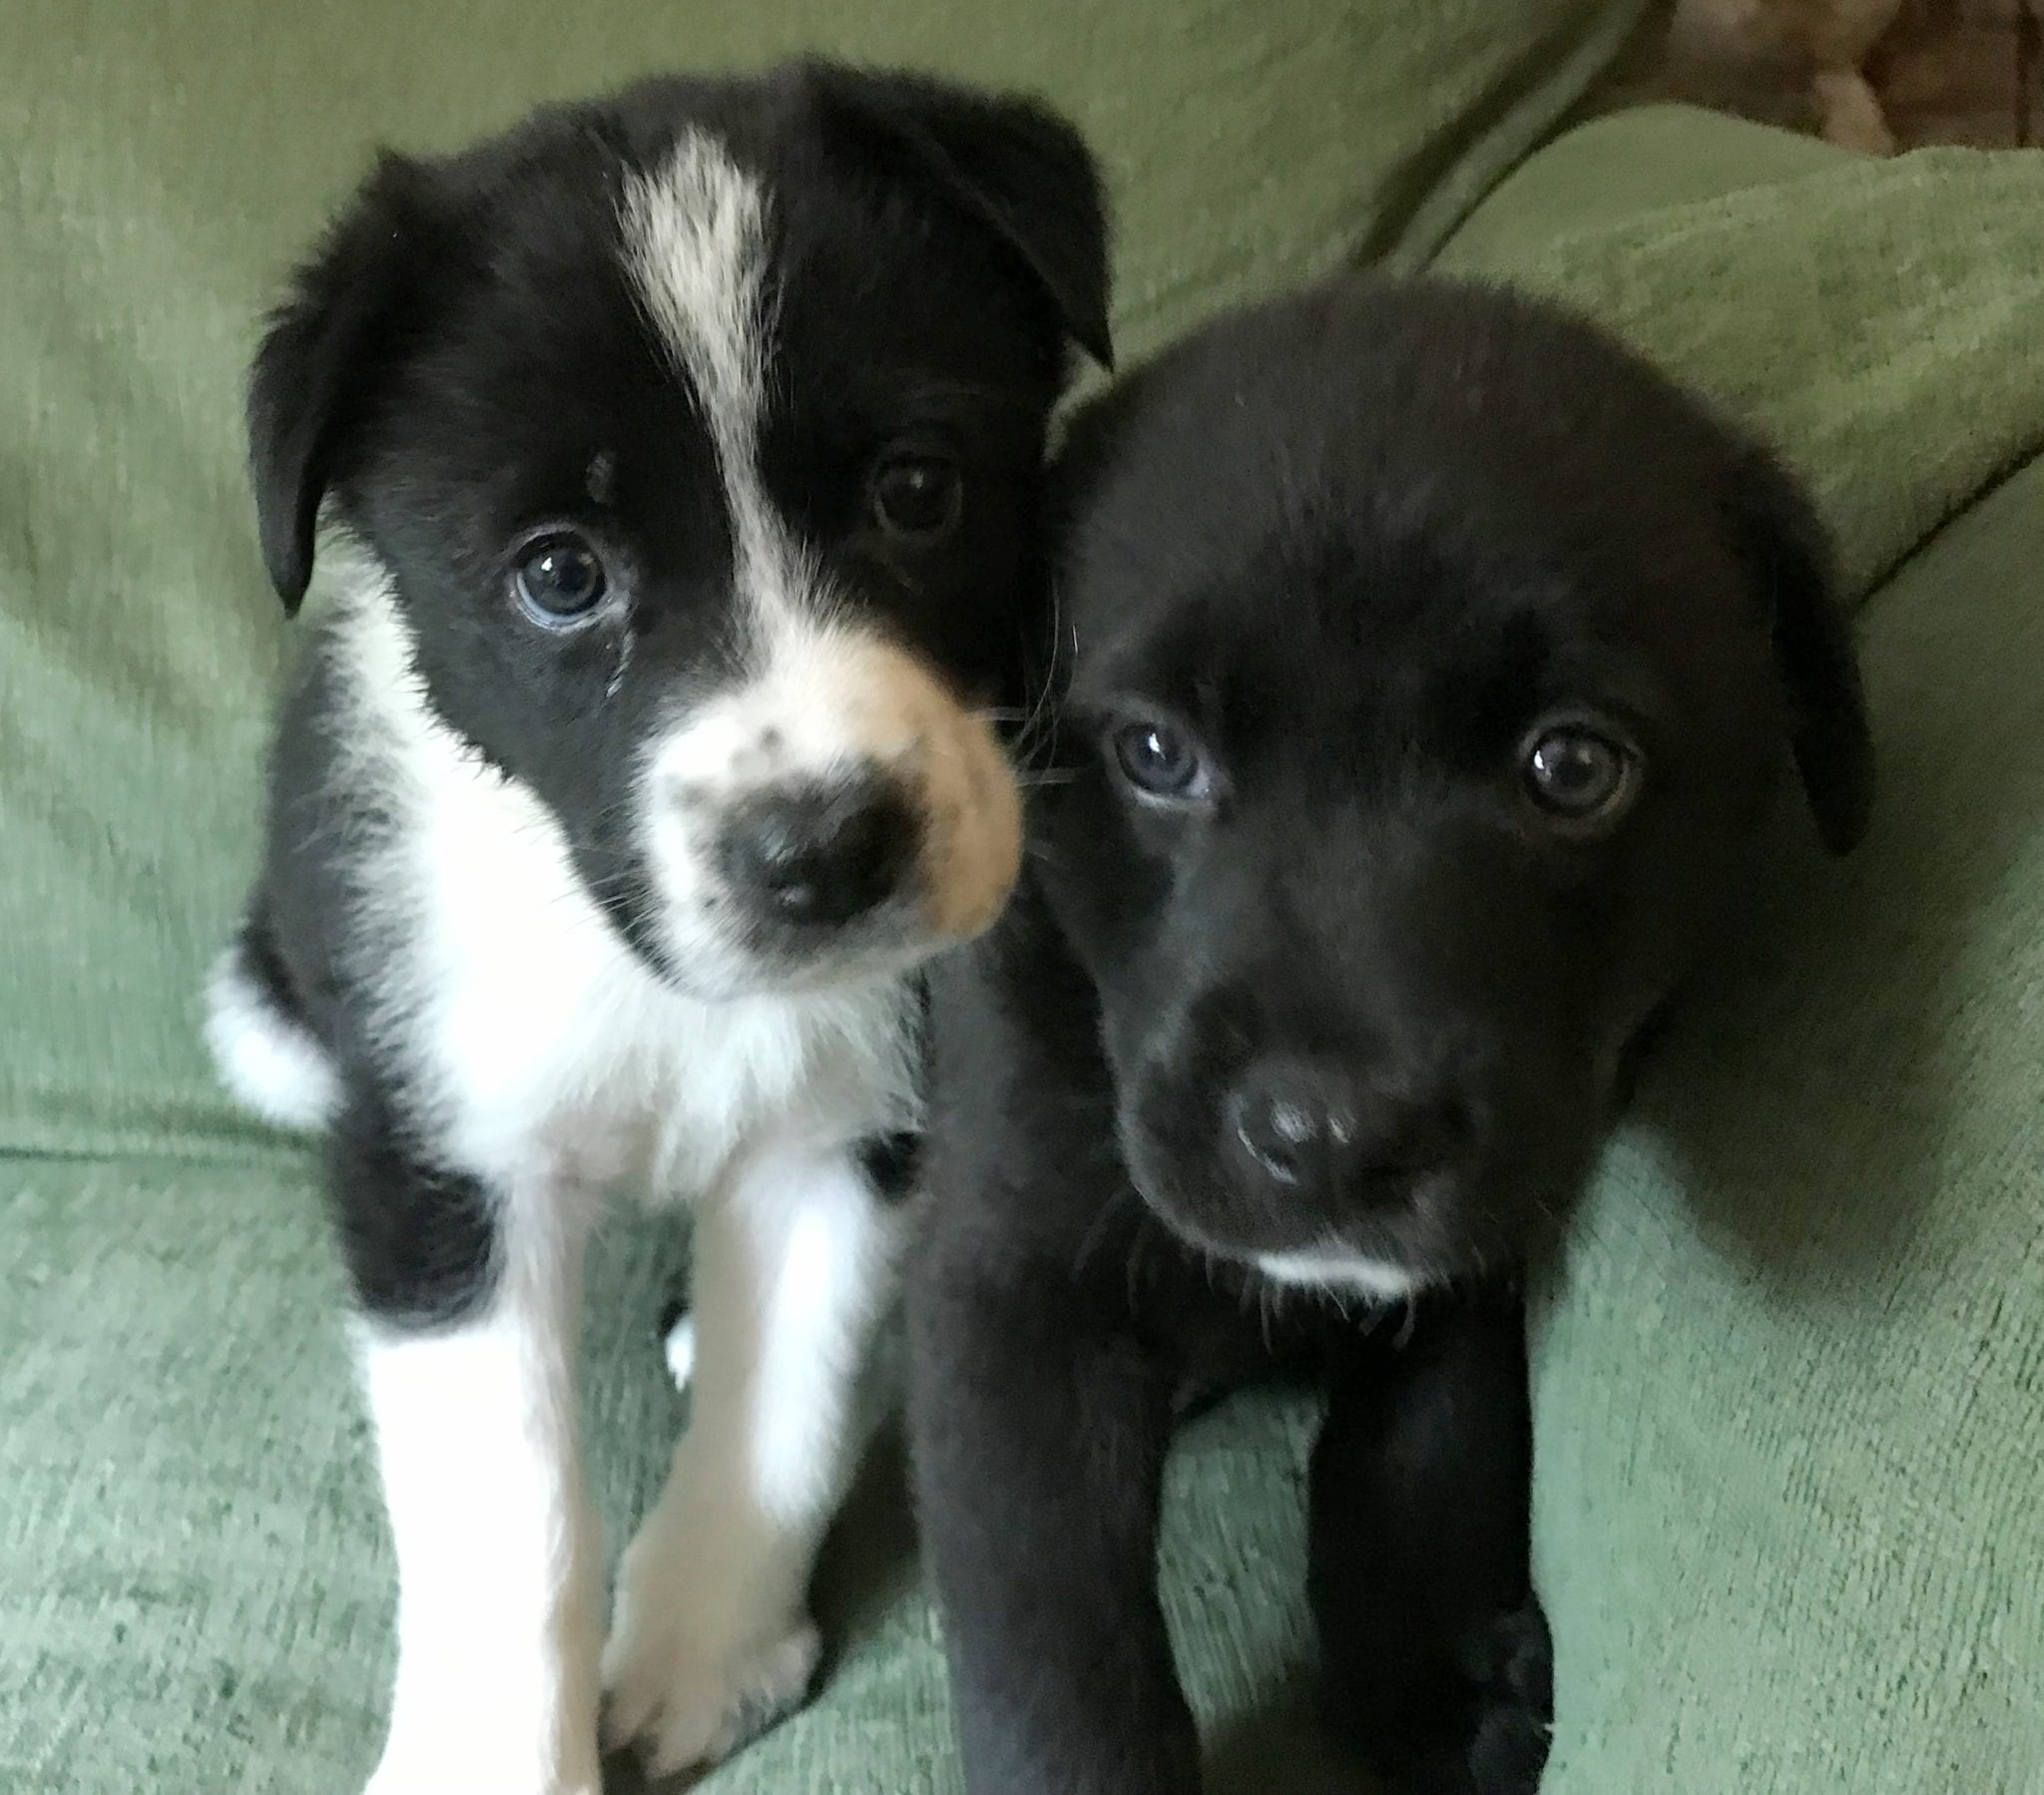 Two cute foster puppies